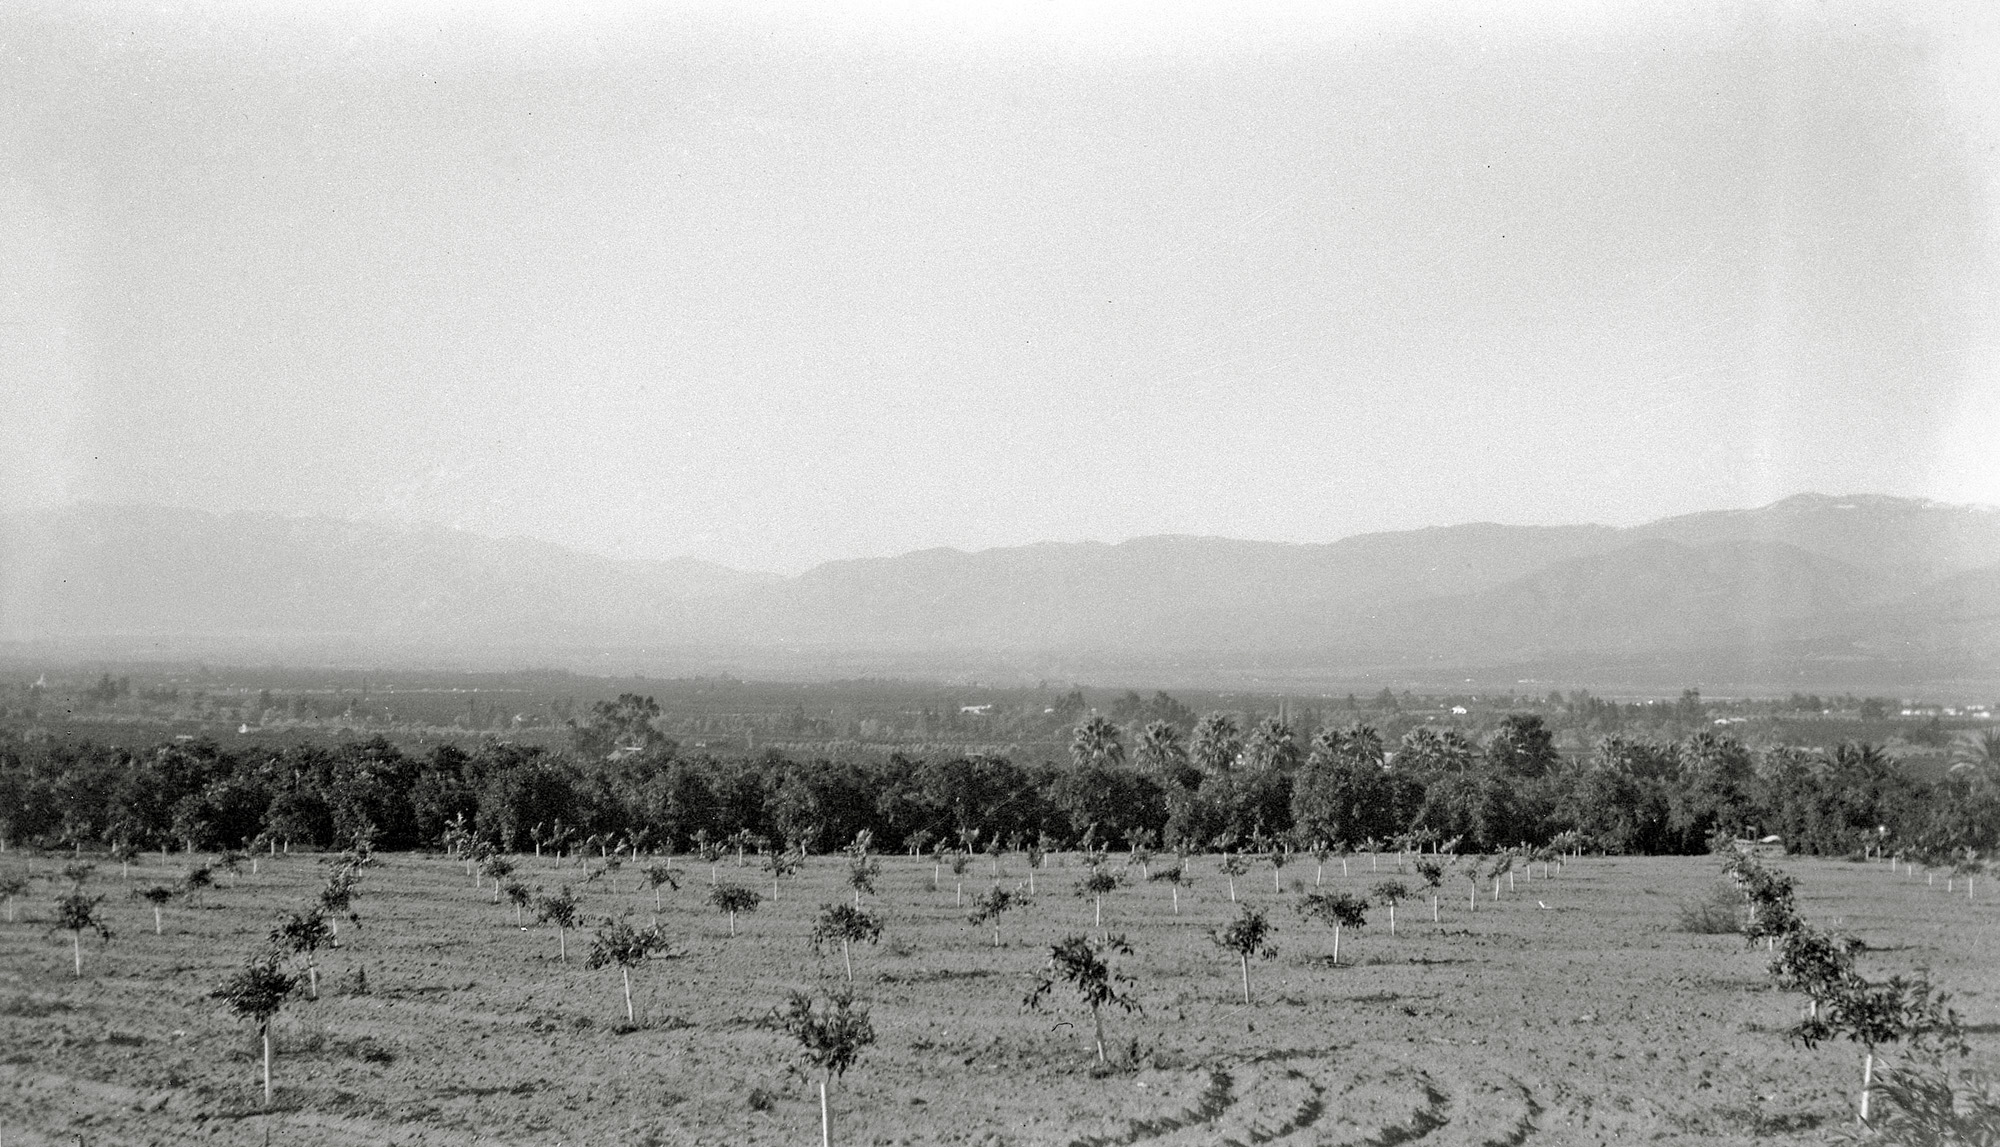 Redlands, California, December 1927. "View overlooking valley at Redlands from point at which road enters hills to Yucaipa." View full size.